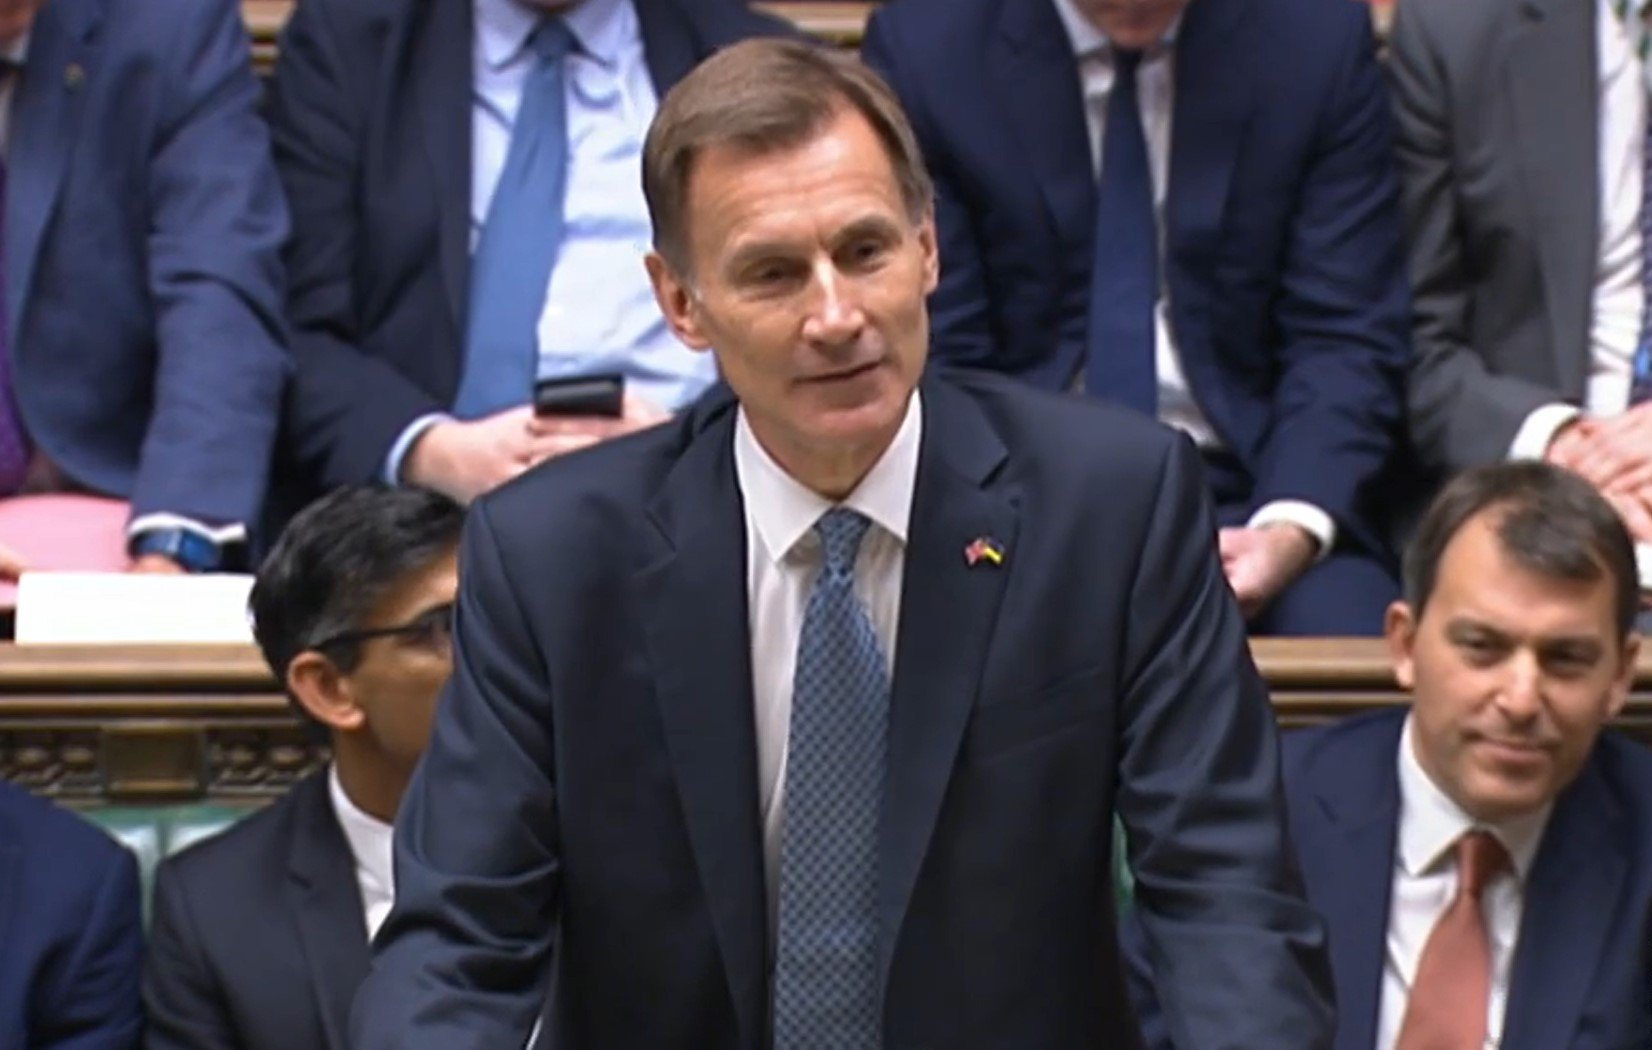 Britain’s Chancellor of the Exchequer Jeremy Hunt delivering his autumn statement to members of the House of Commons. Photo: dpa